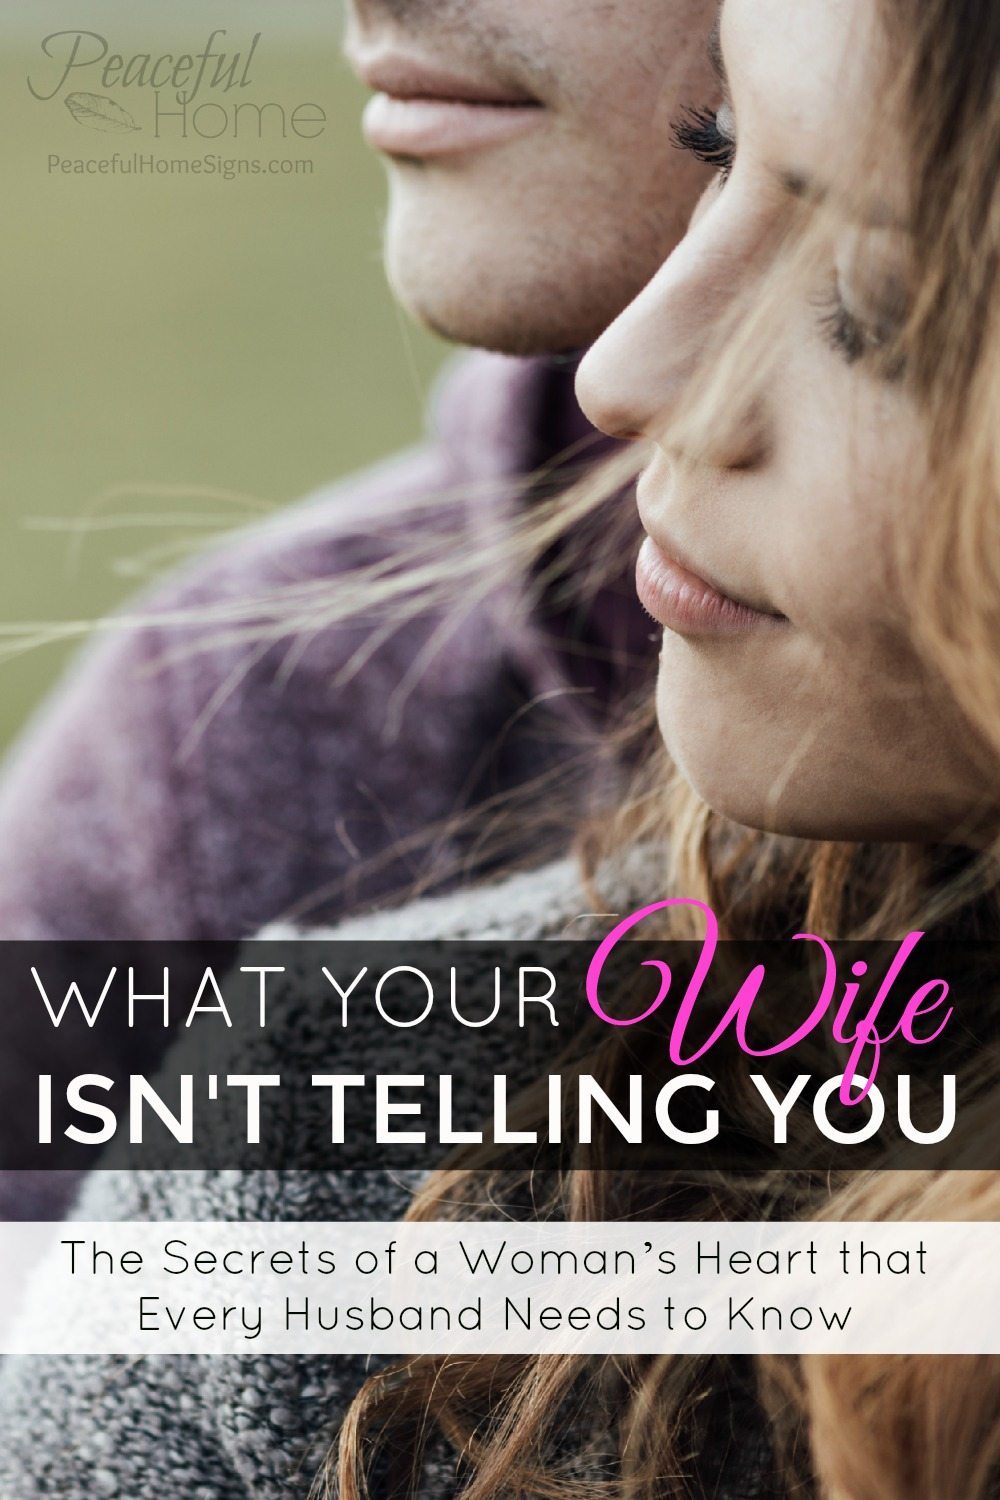 What your wife isn't telling you: The secrets of a woman's heart every husband needs to know | Christian Marriage Advice for Husbands | How to Love Your Wife | Christian Marriage | Love your wife well | Husbands love your wives | Christian Advice for Restoring Relationships | Healing Christian Marriage Christian Wives and Sex, What wives need from their husbands | Biblical Approach to Marriage | Sacrificial Love in Marriage | Mutual Submission in Marriage